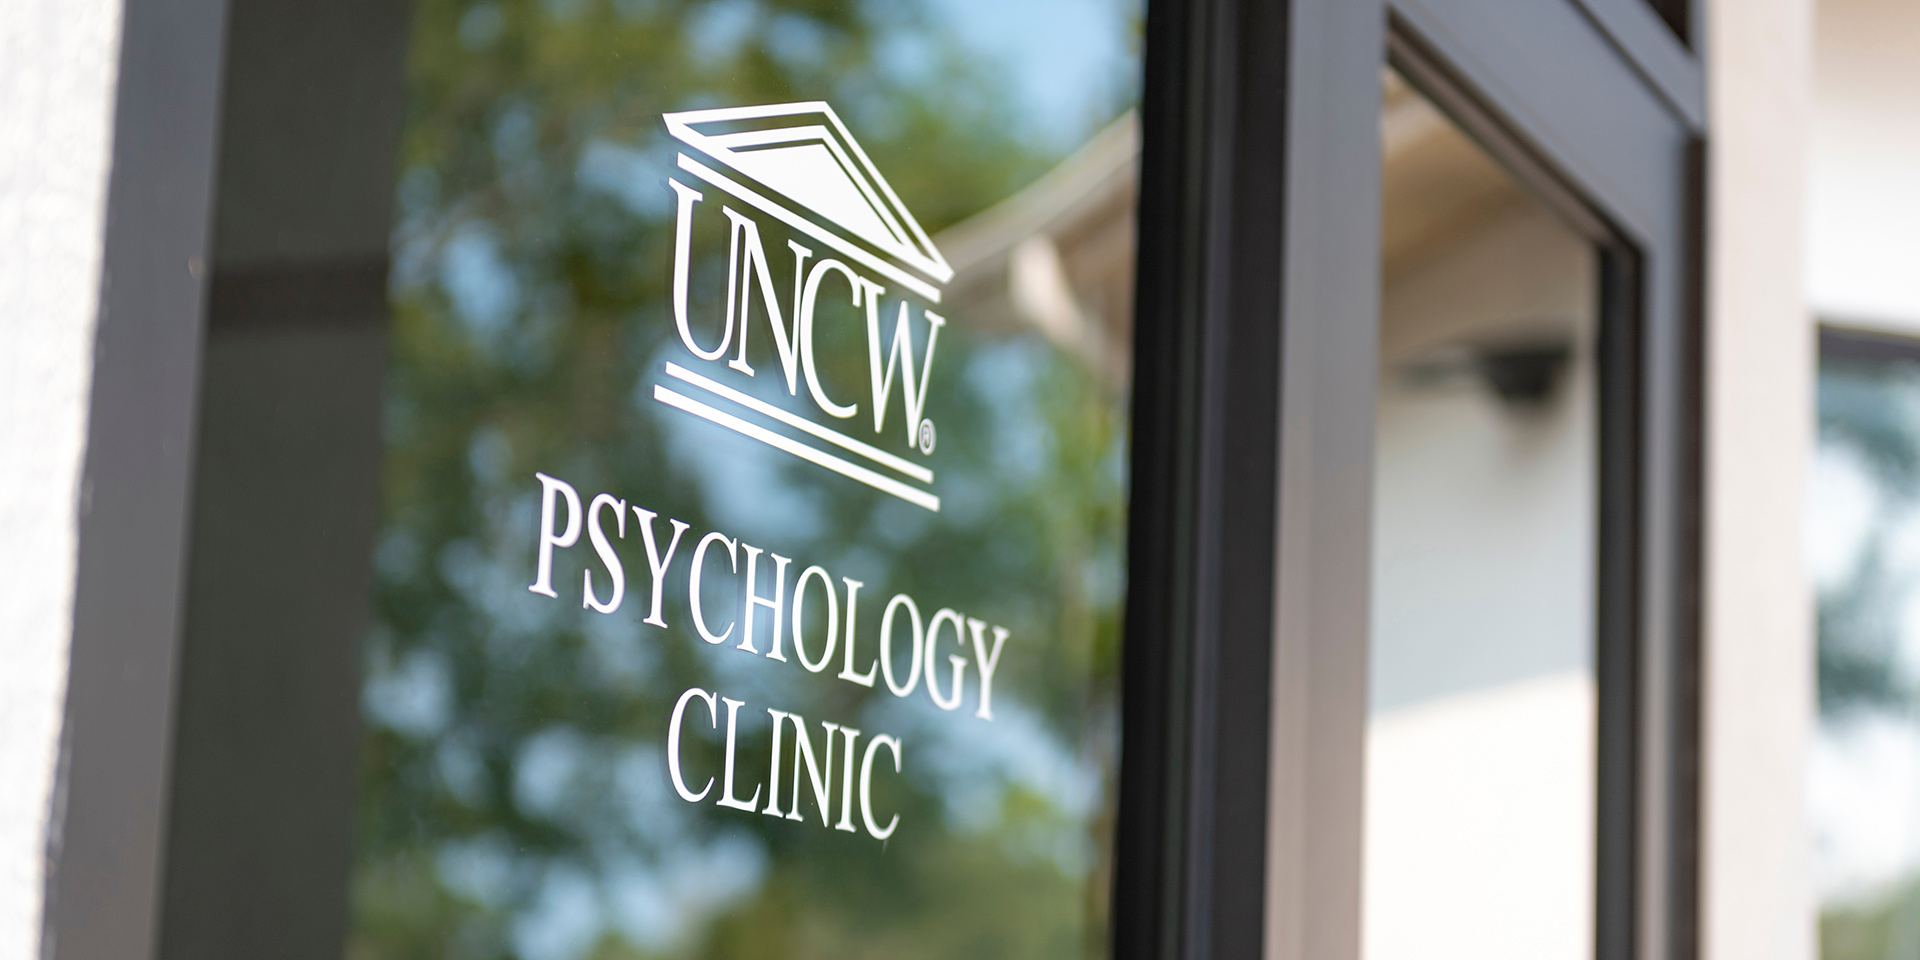 Writing on a door says UNCW Psychology Clinic